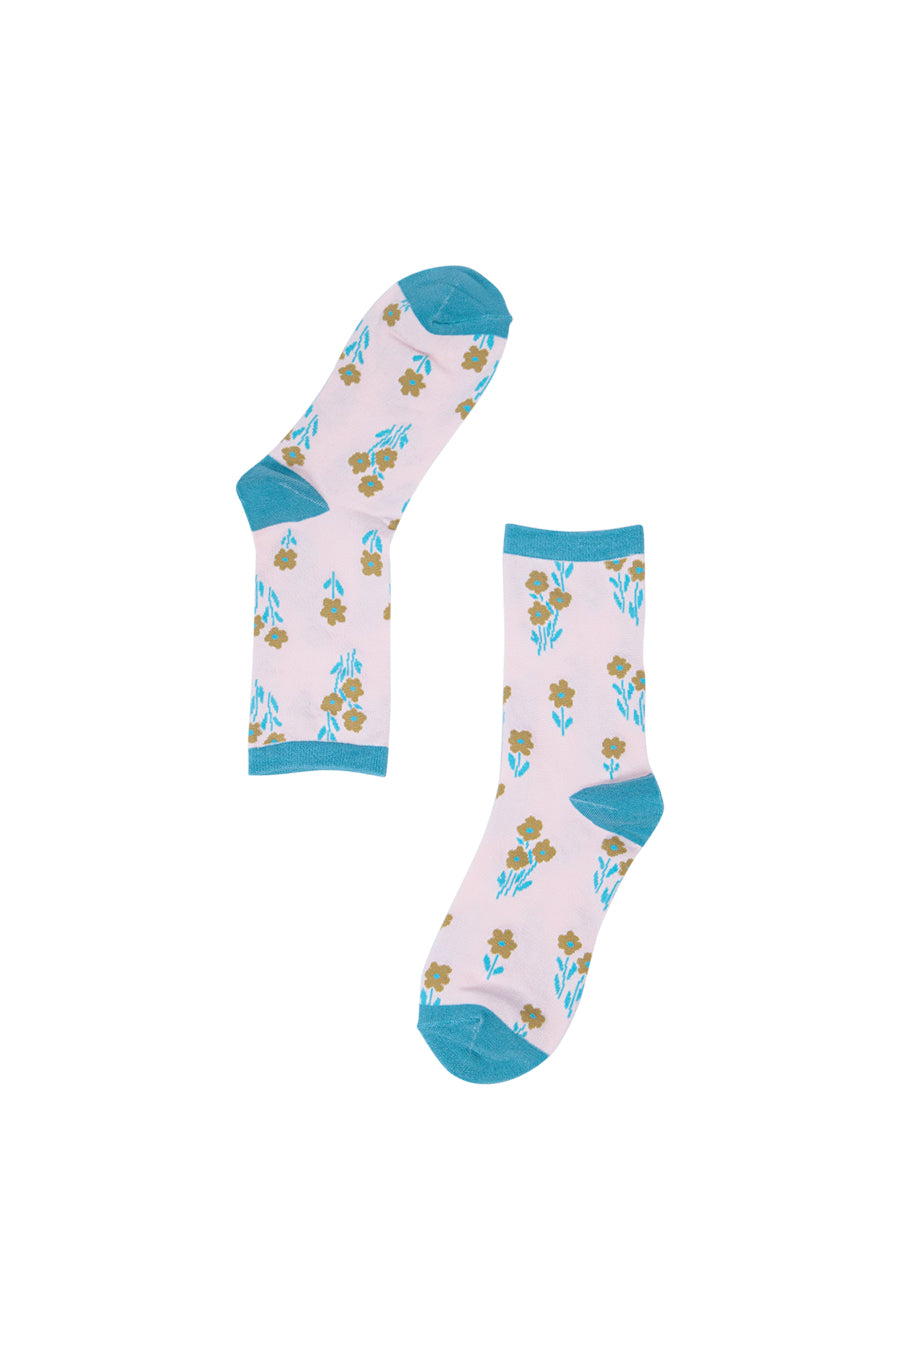 pink socks with an all over wild flower pattern